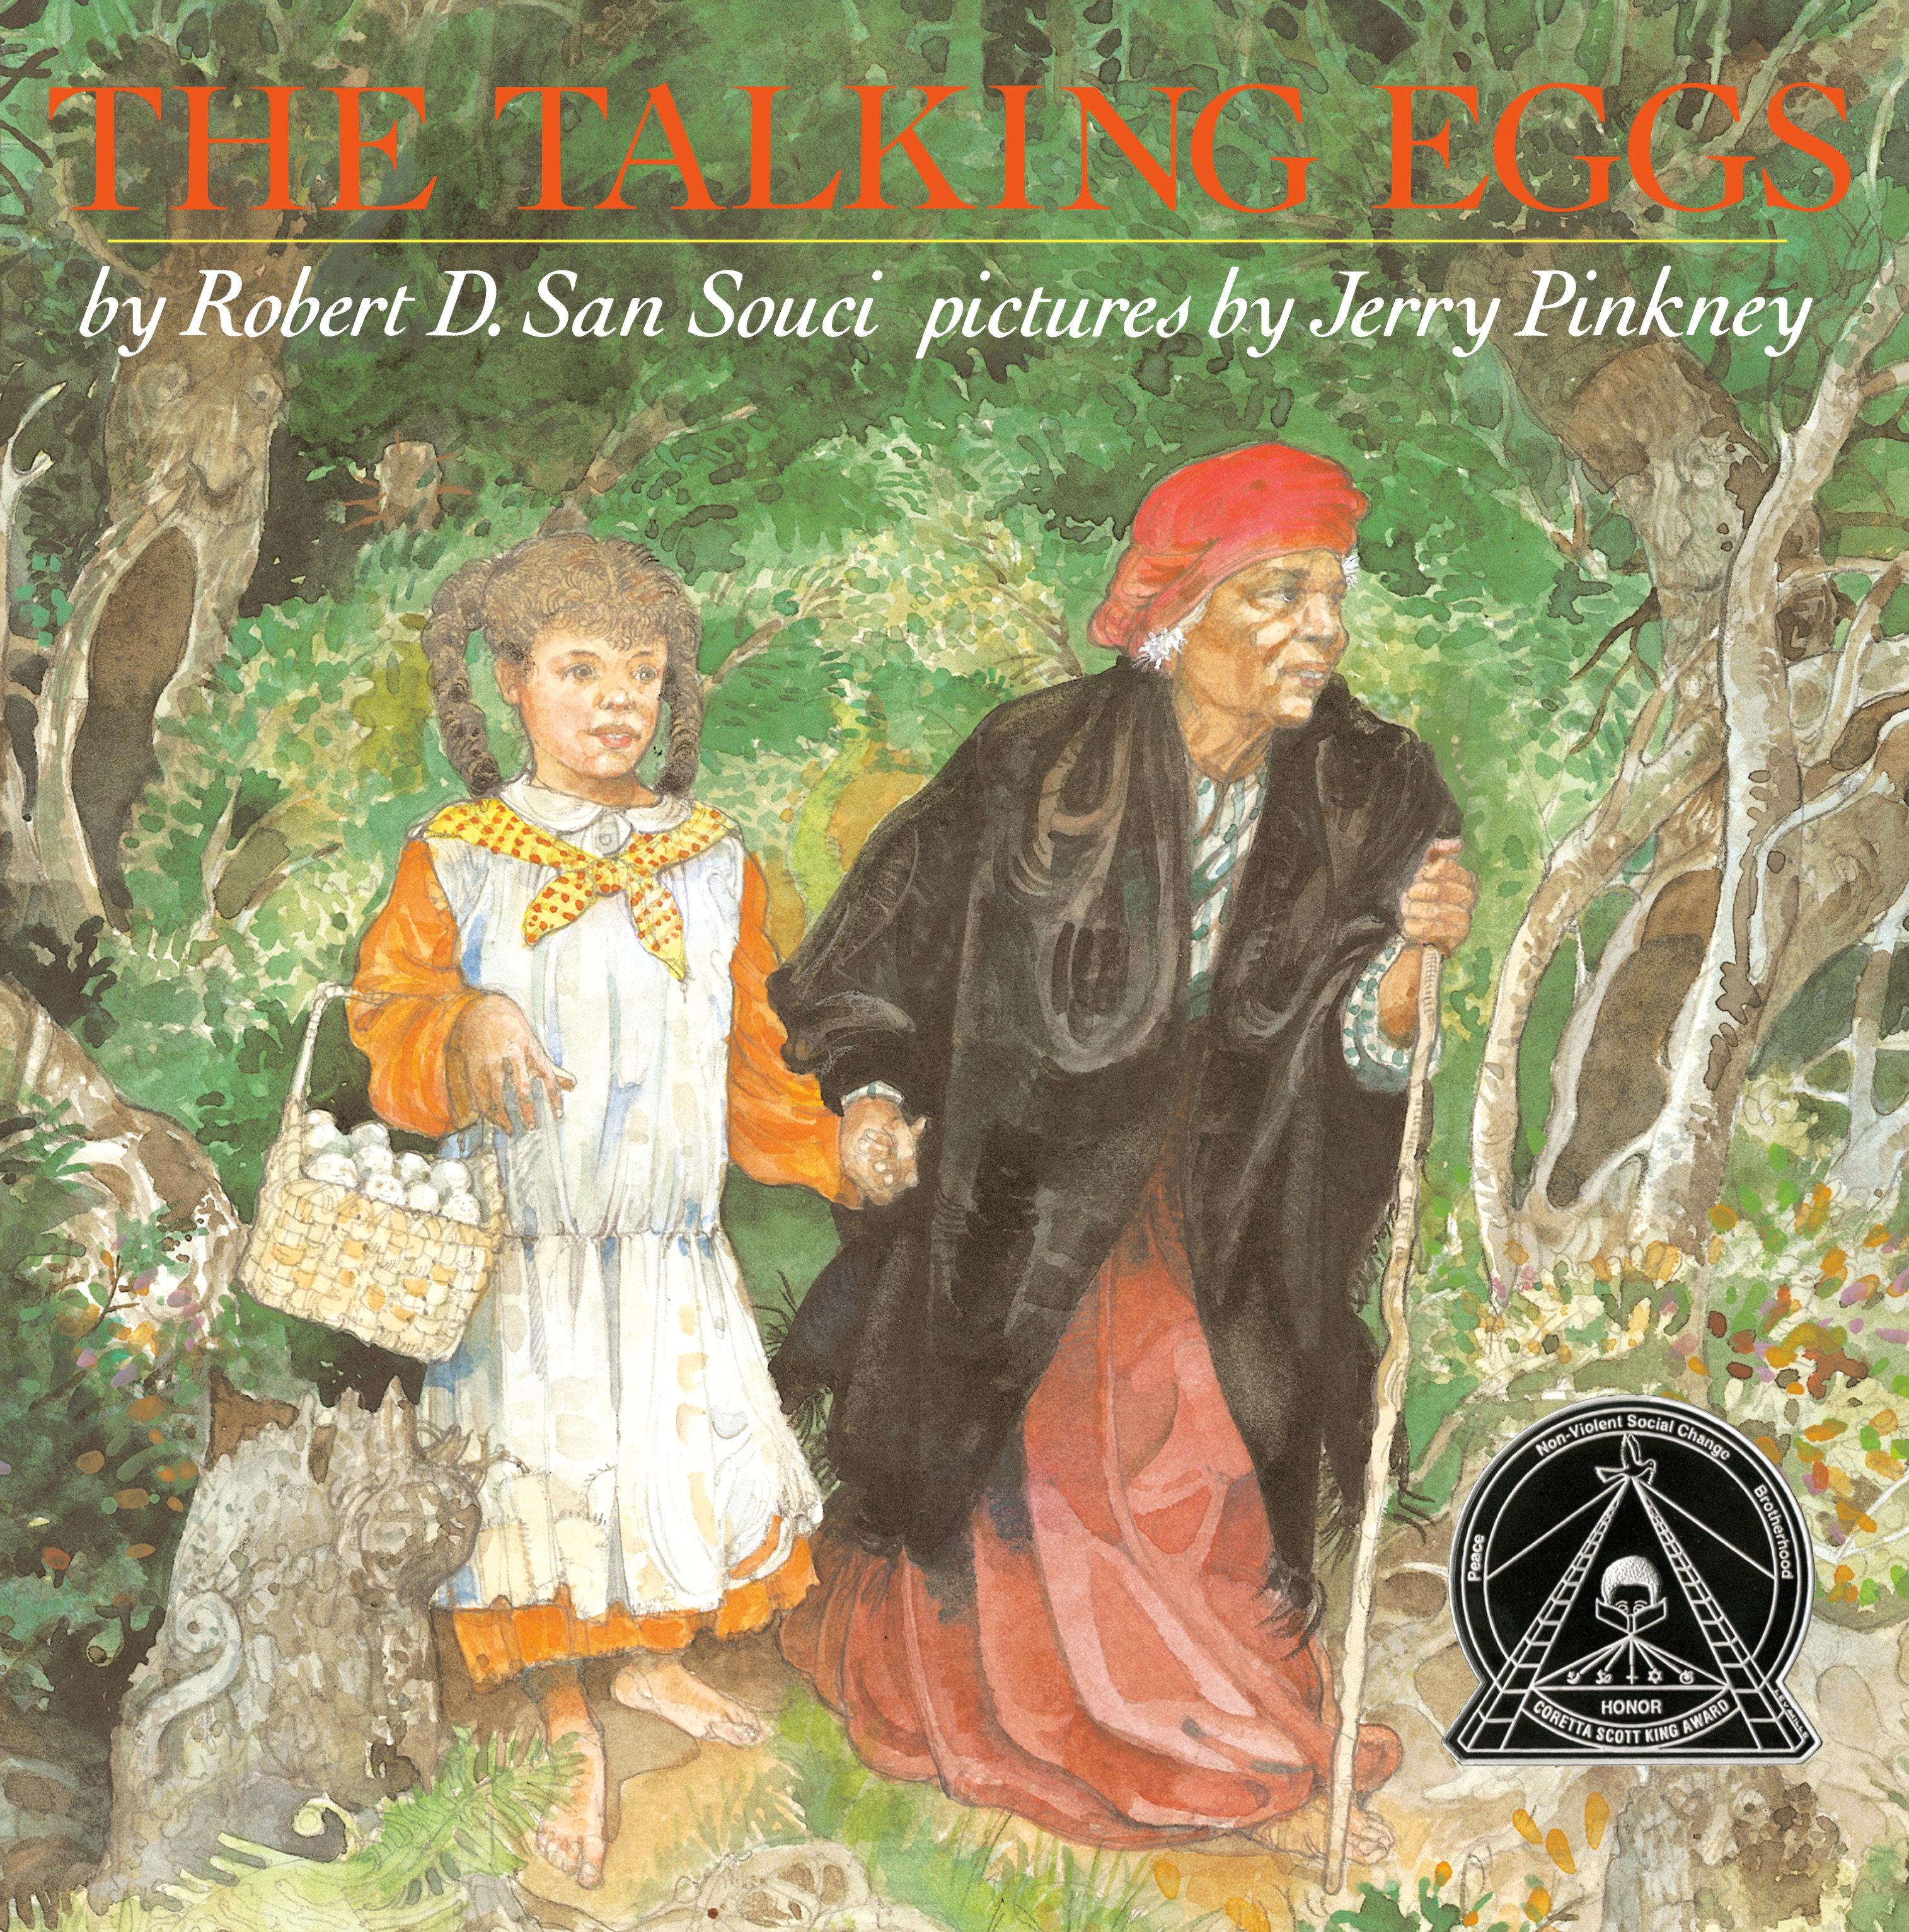 The Talking Eggs: A Folktale from the American South